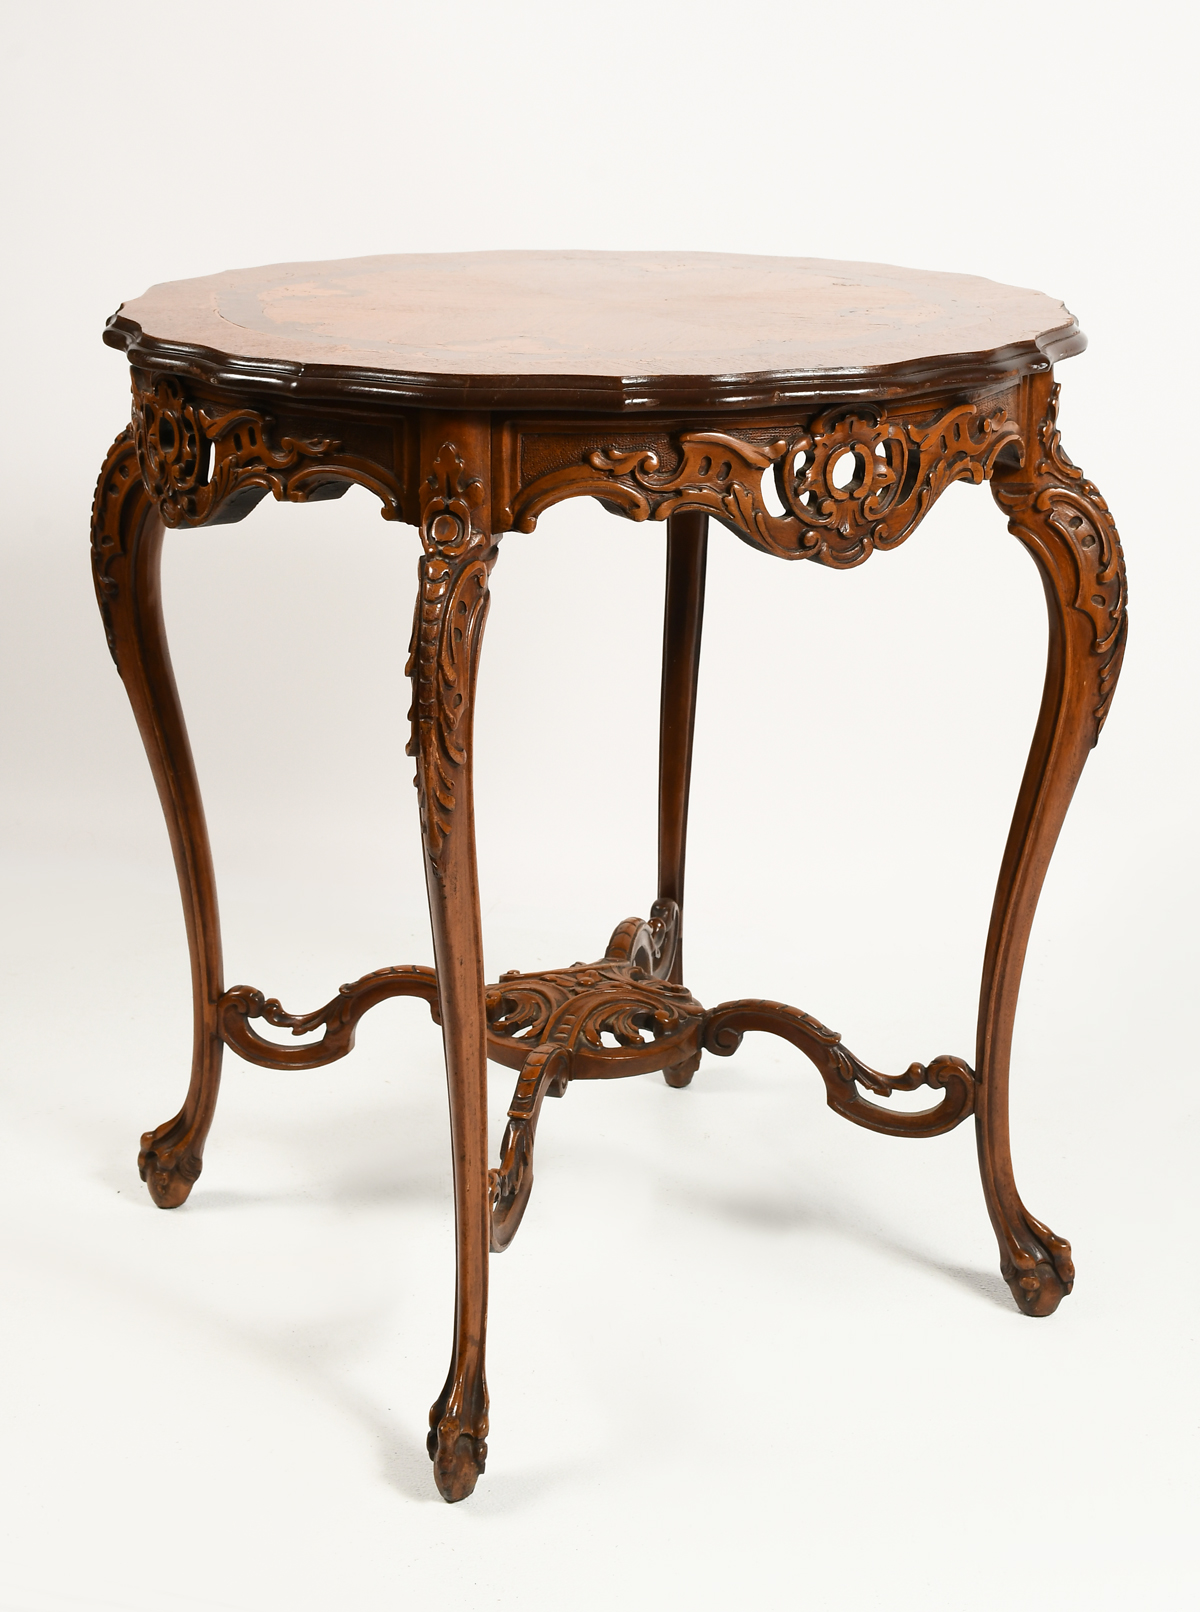 MARQUETRY INLAID LAMP TABLE: Early